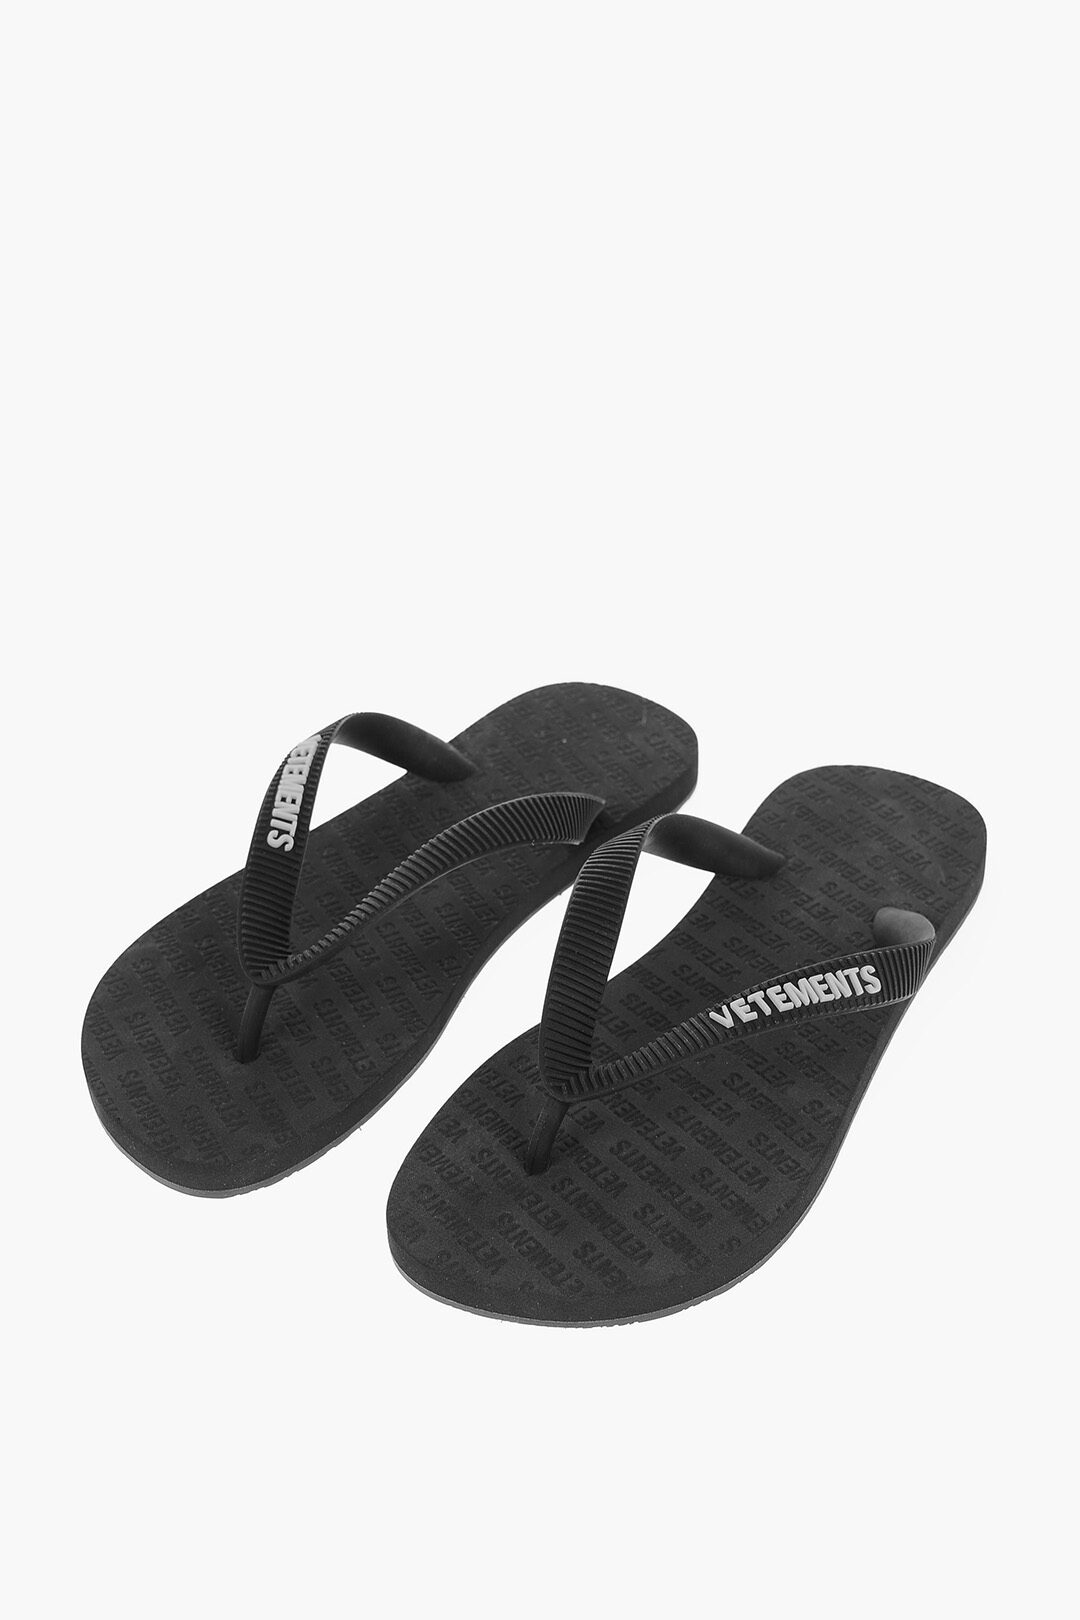 Vetements Rubber Flip Flops with Embossed Logo women - Glamood Outlet